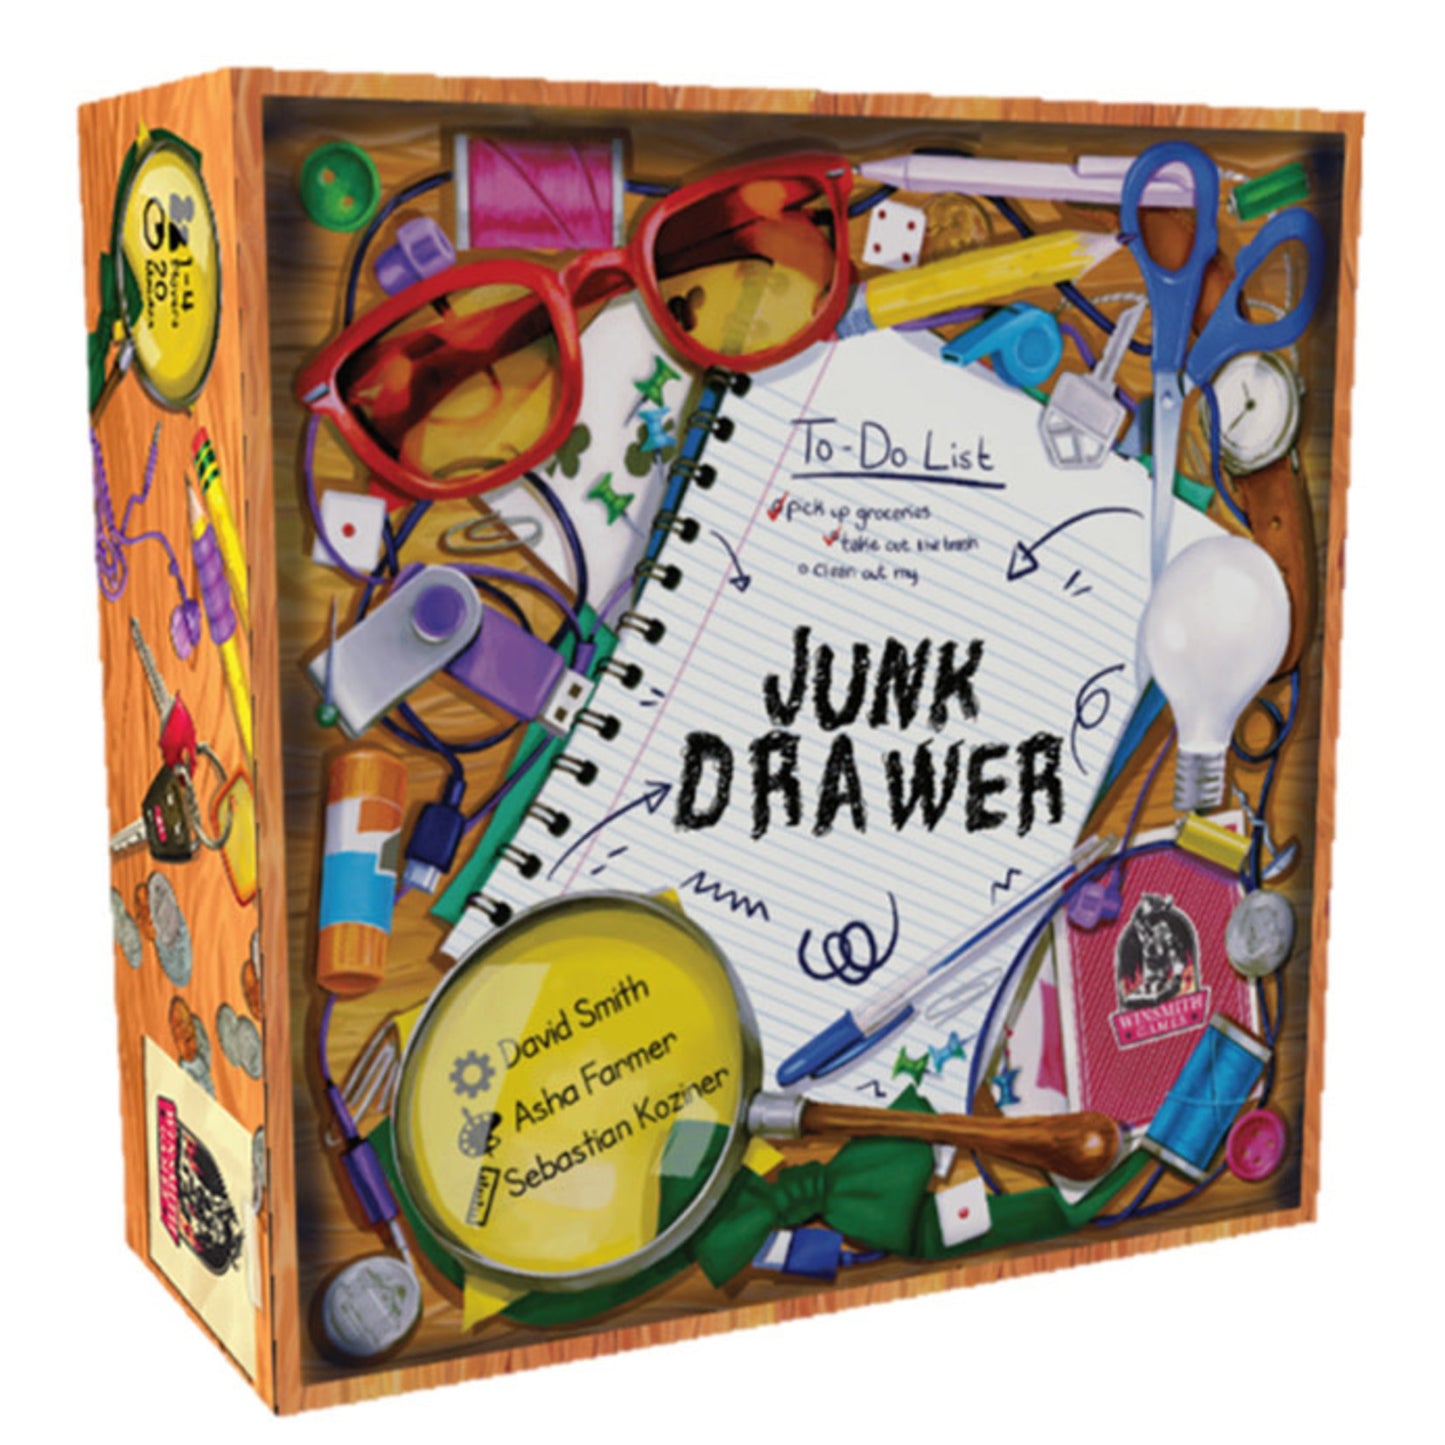 Junk Drawer Kickstarter Edition with promo cards by WinSmith Games